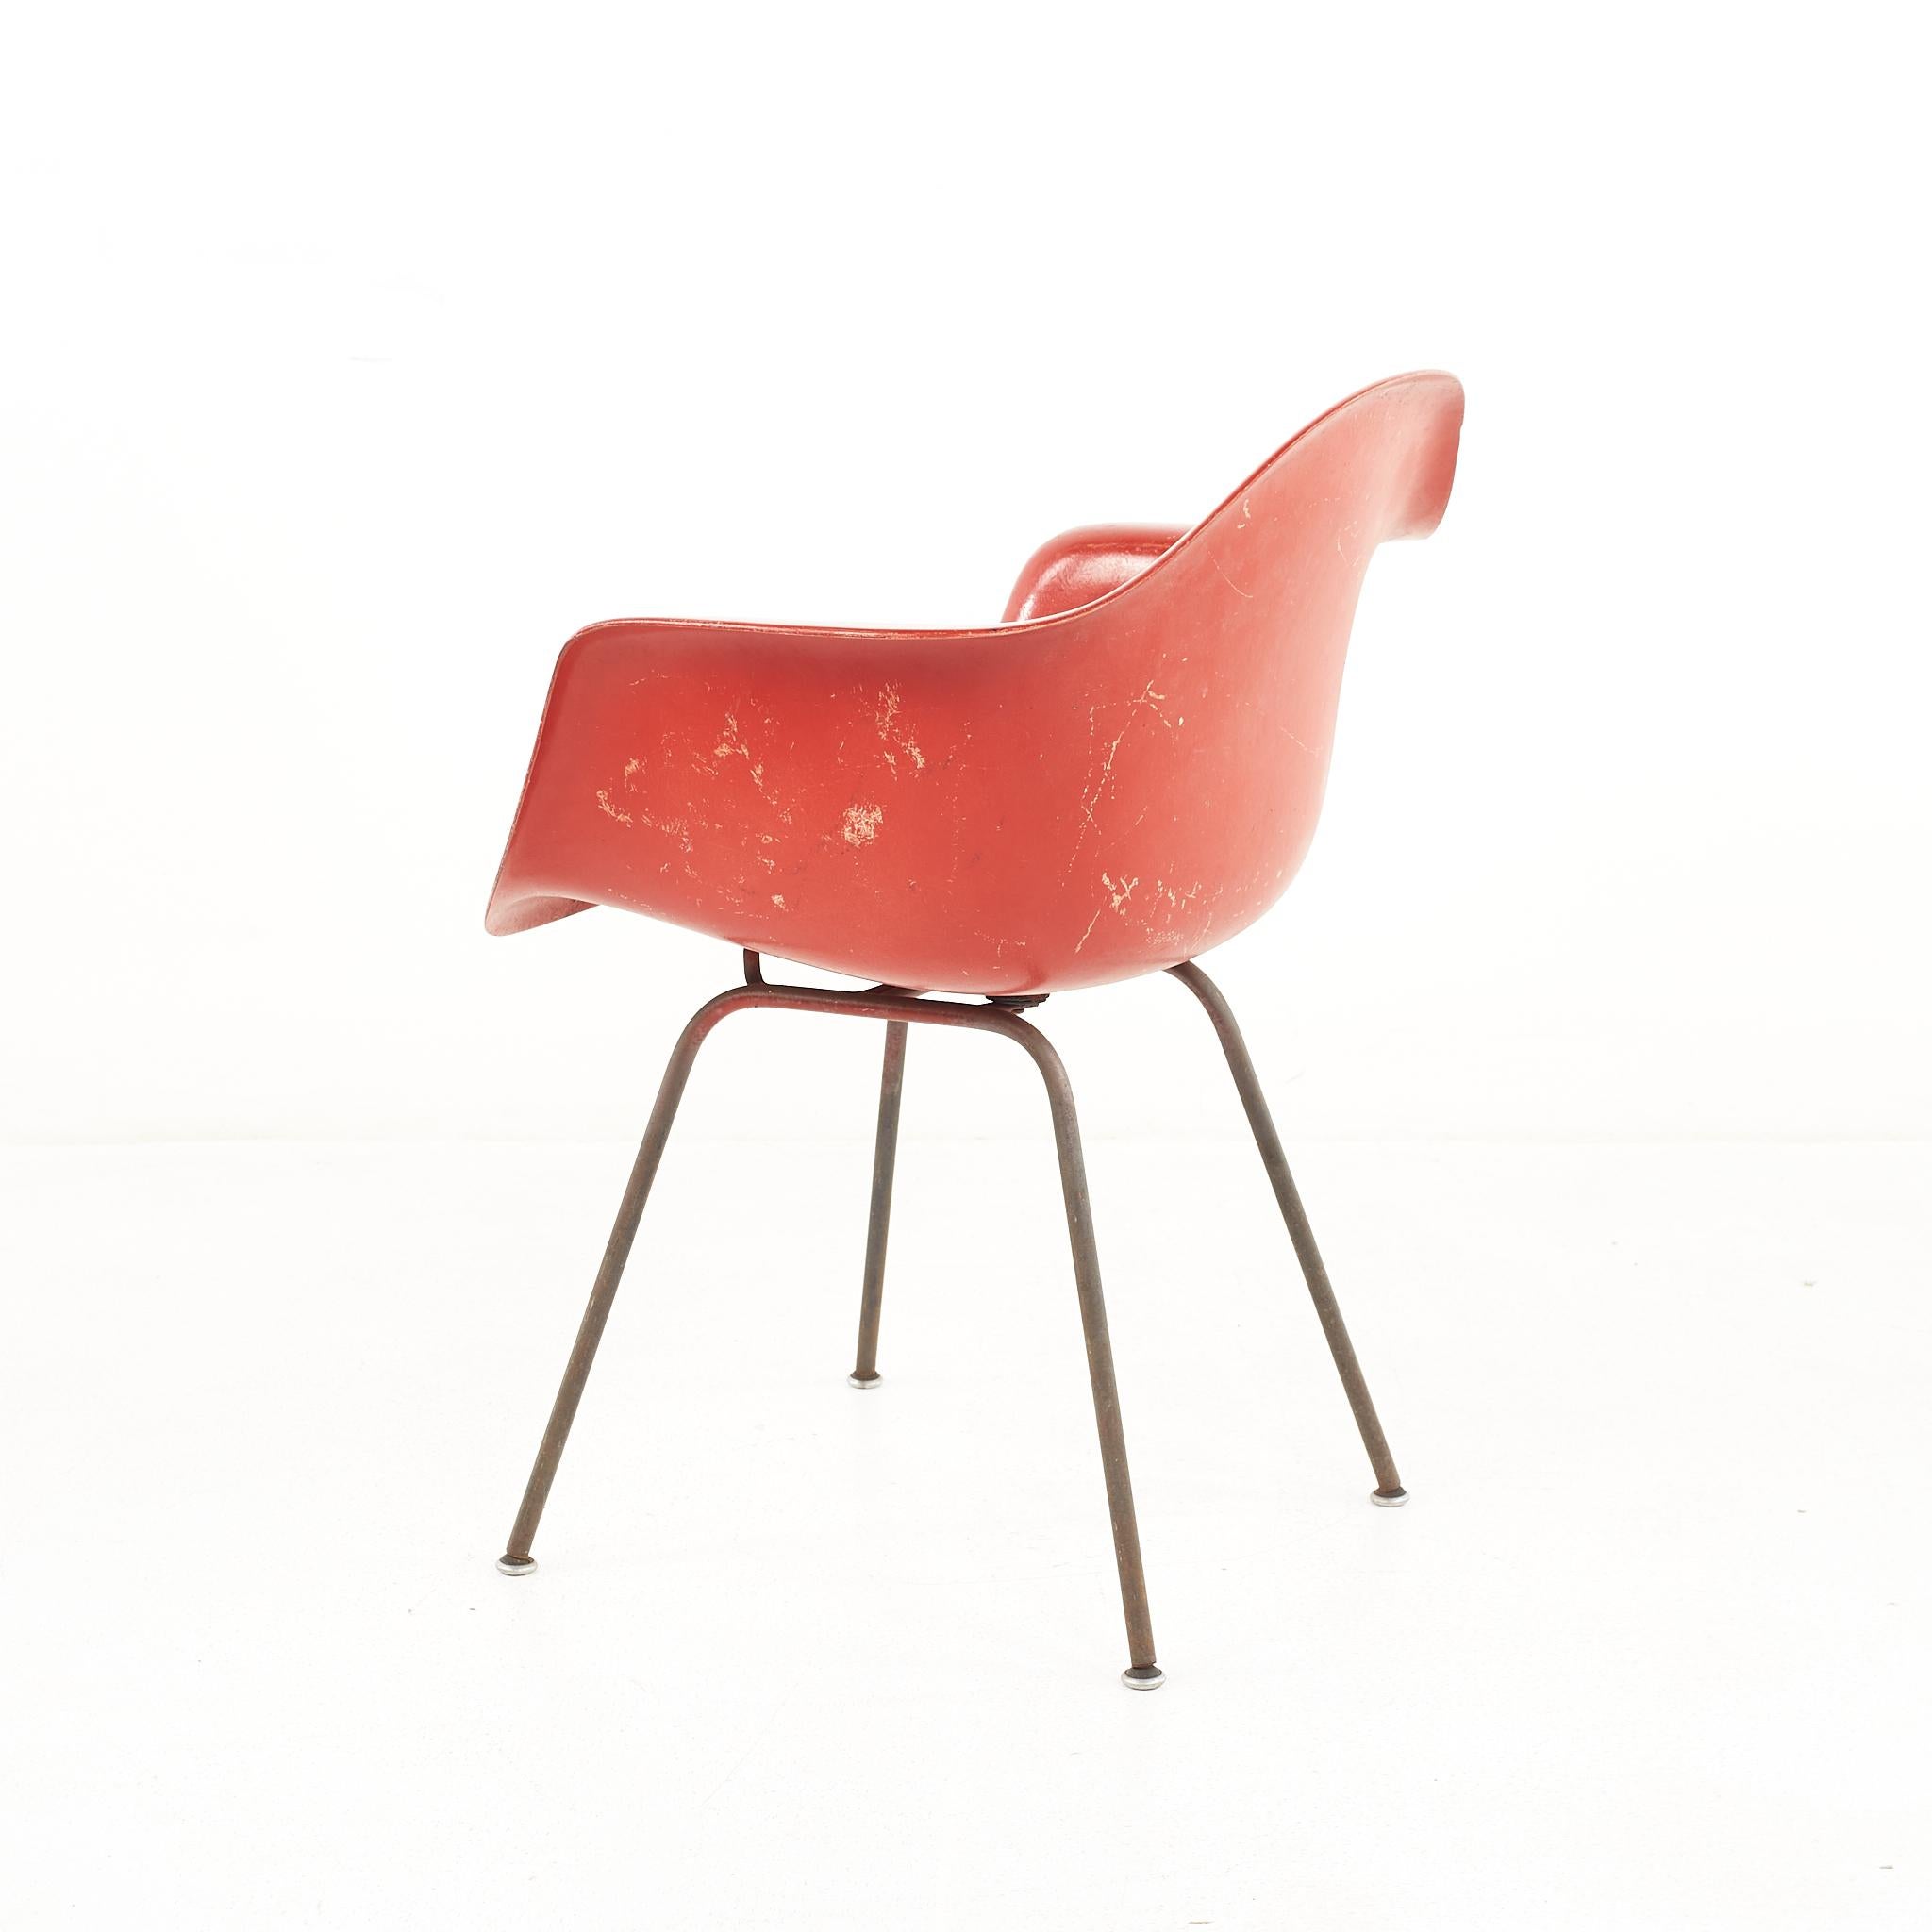 Late 20th Century Eames For Herman Miller Mid Century Fiberglass Shell Red Chair For Sale